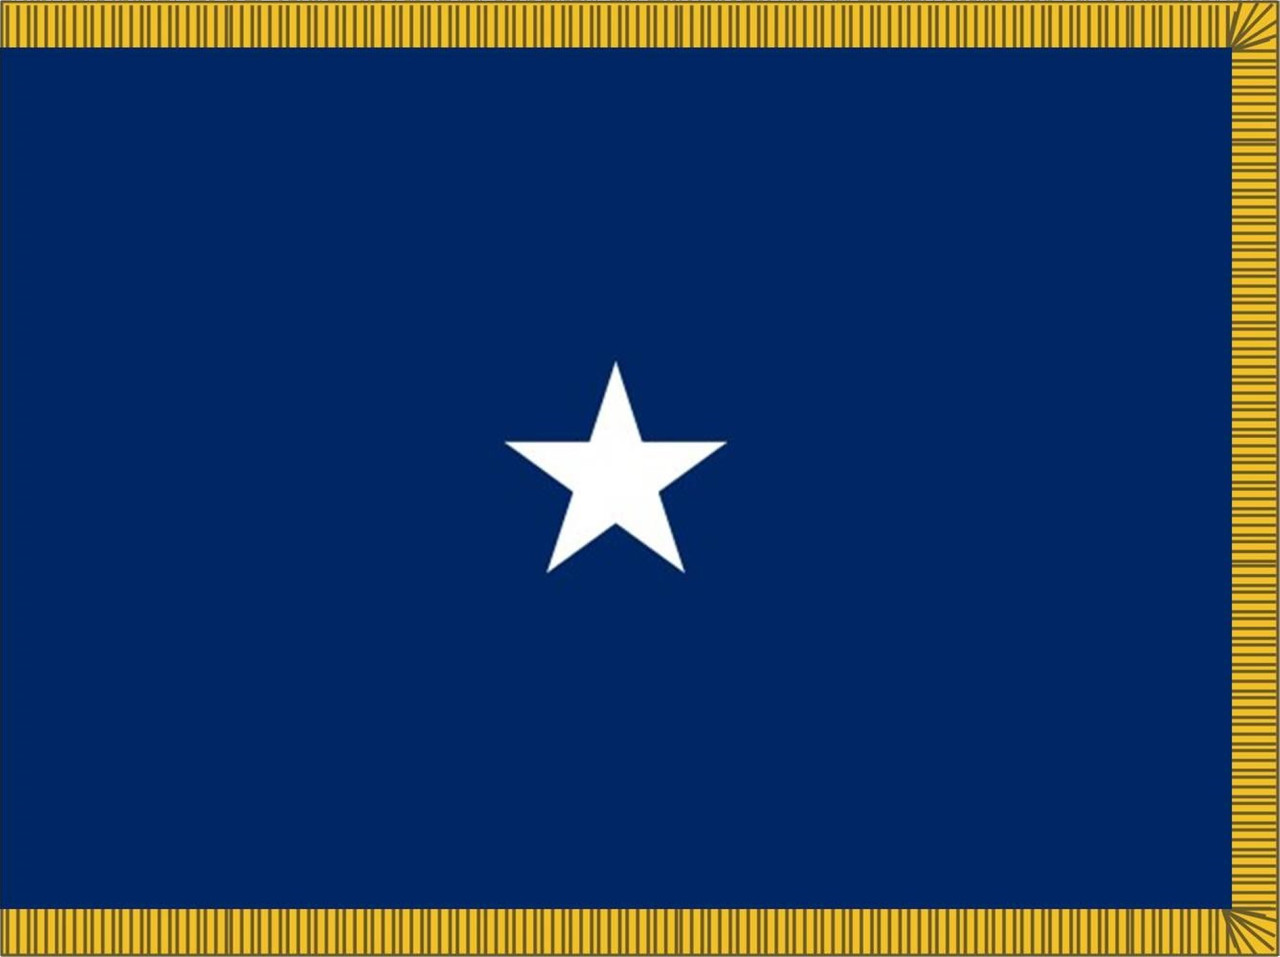 Navy Rear Admiral Lower Half Flag, 1 Star Nylon Applique with Pole Hem and Gold Fringe, Size 3' X 5', 1103054ADM